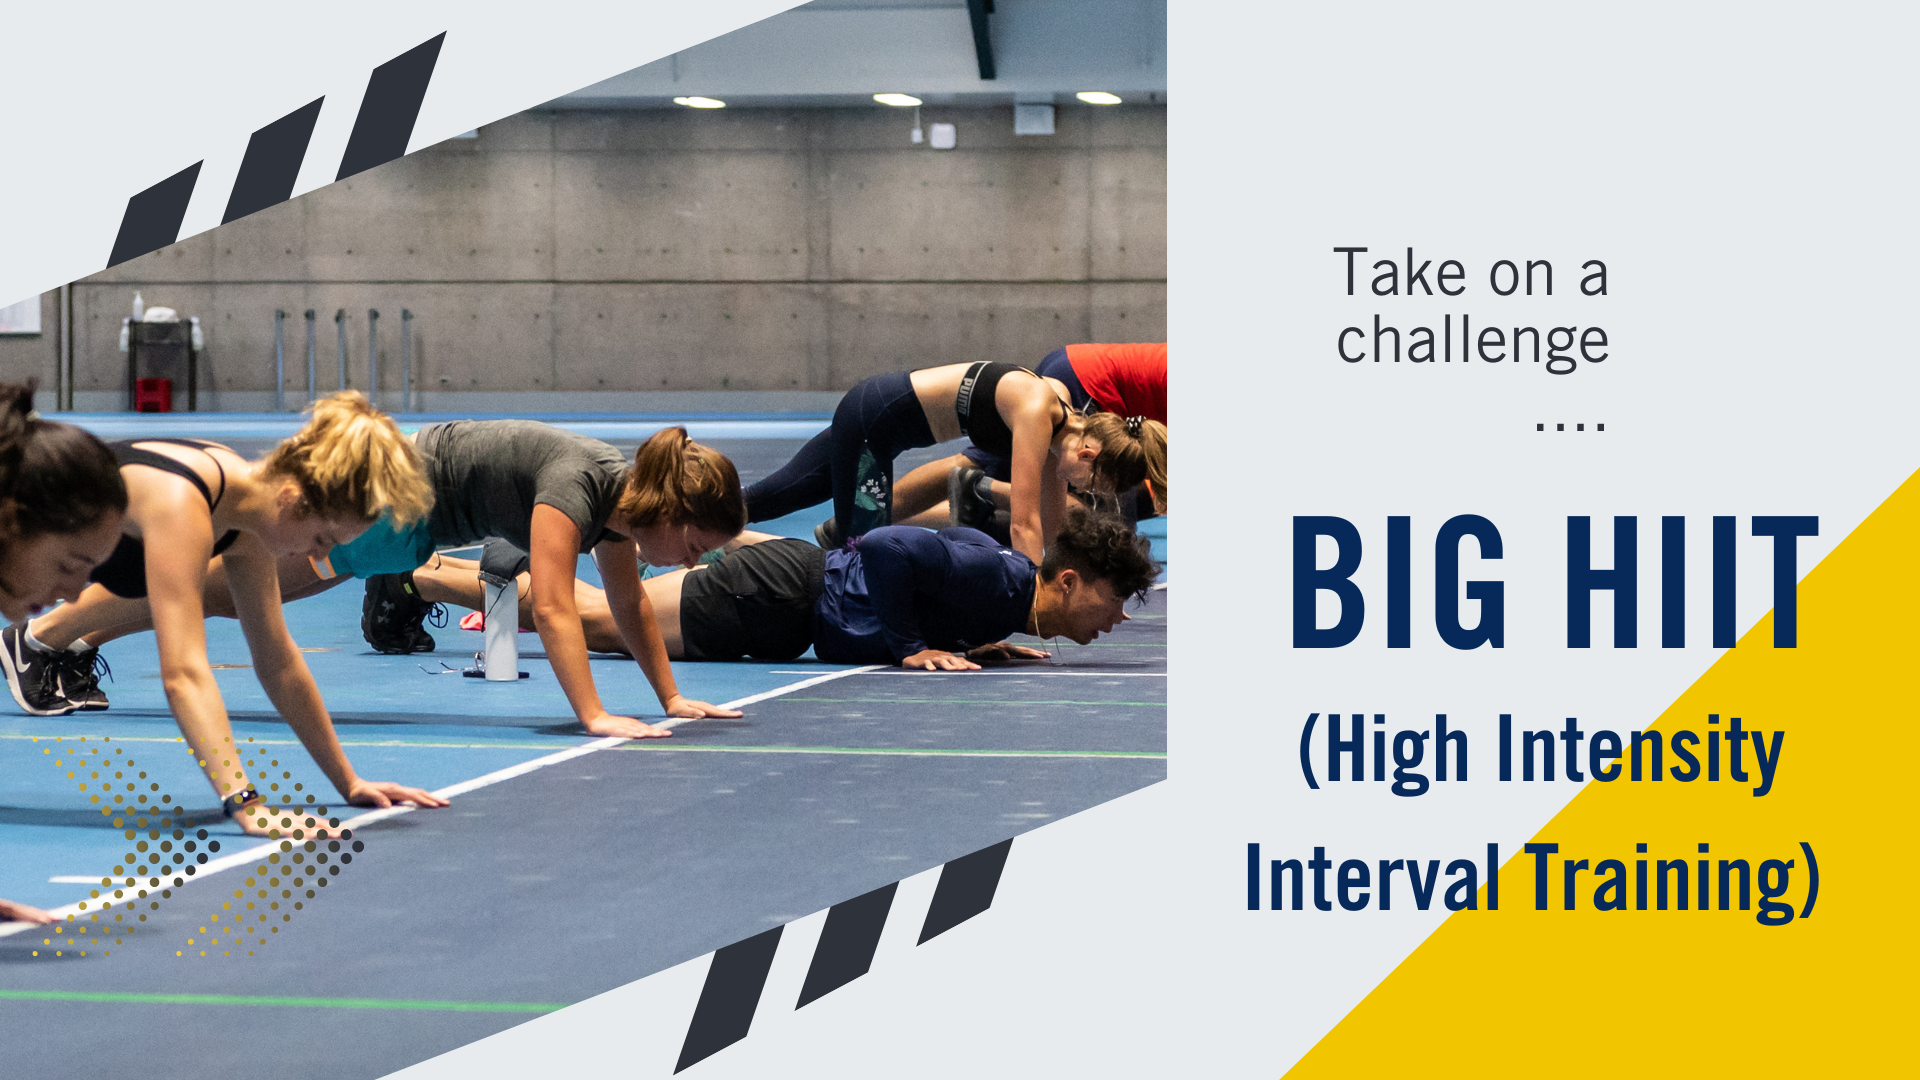 graphic image advertising High Intensity Interval Training with group of people doing pushups depicted